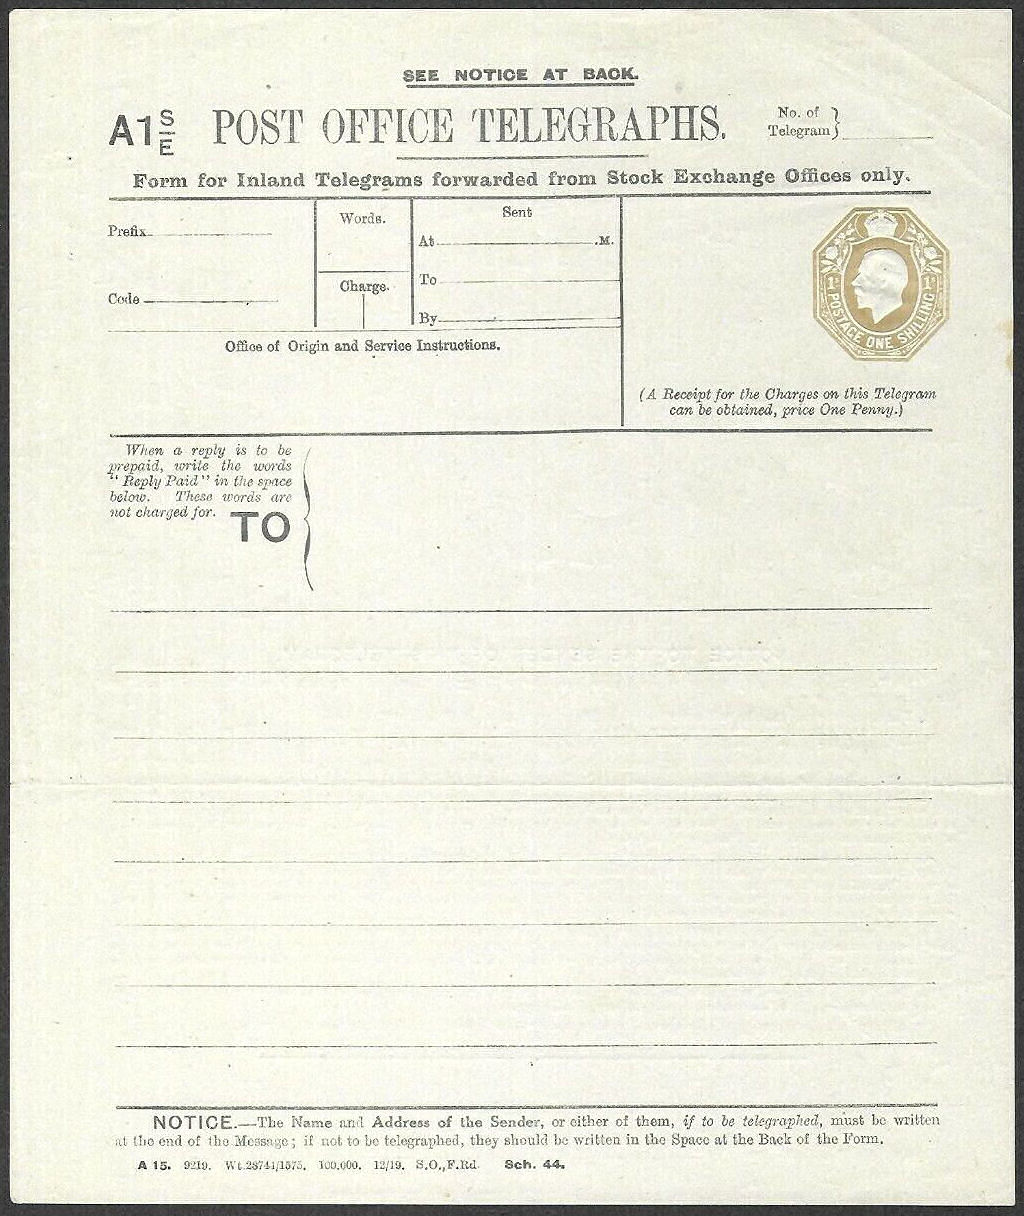 PO form 48a - S.O.,F.Rd. - front